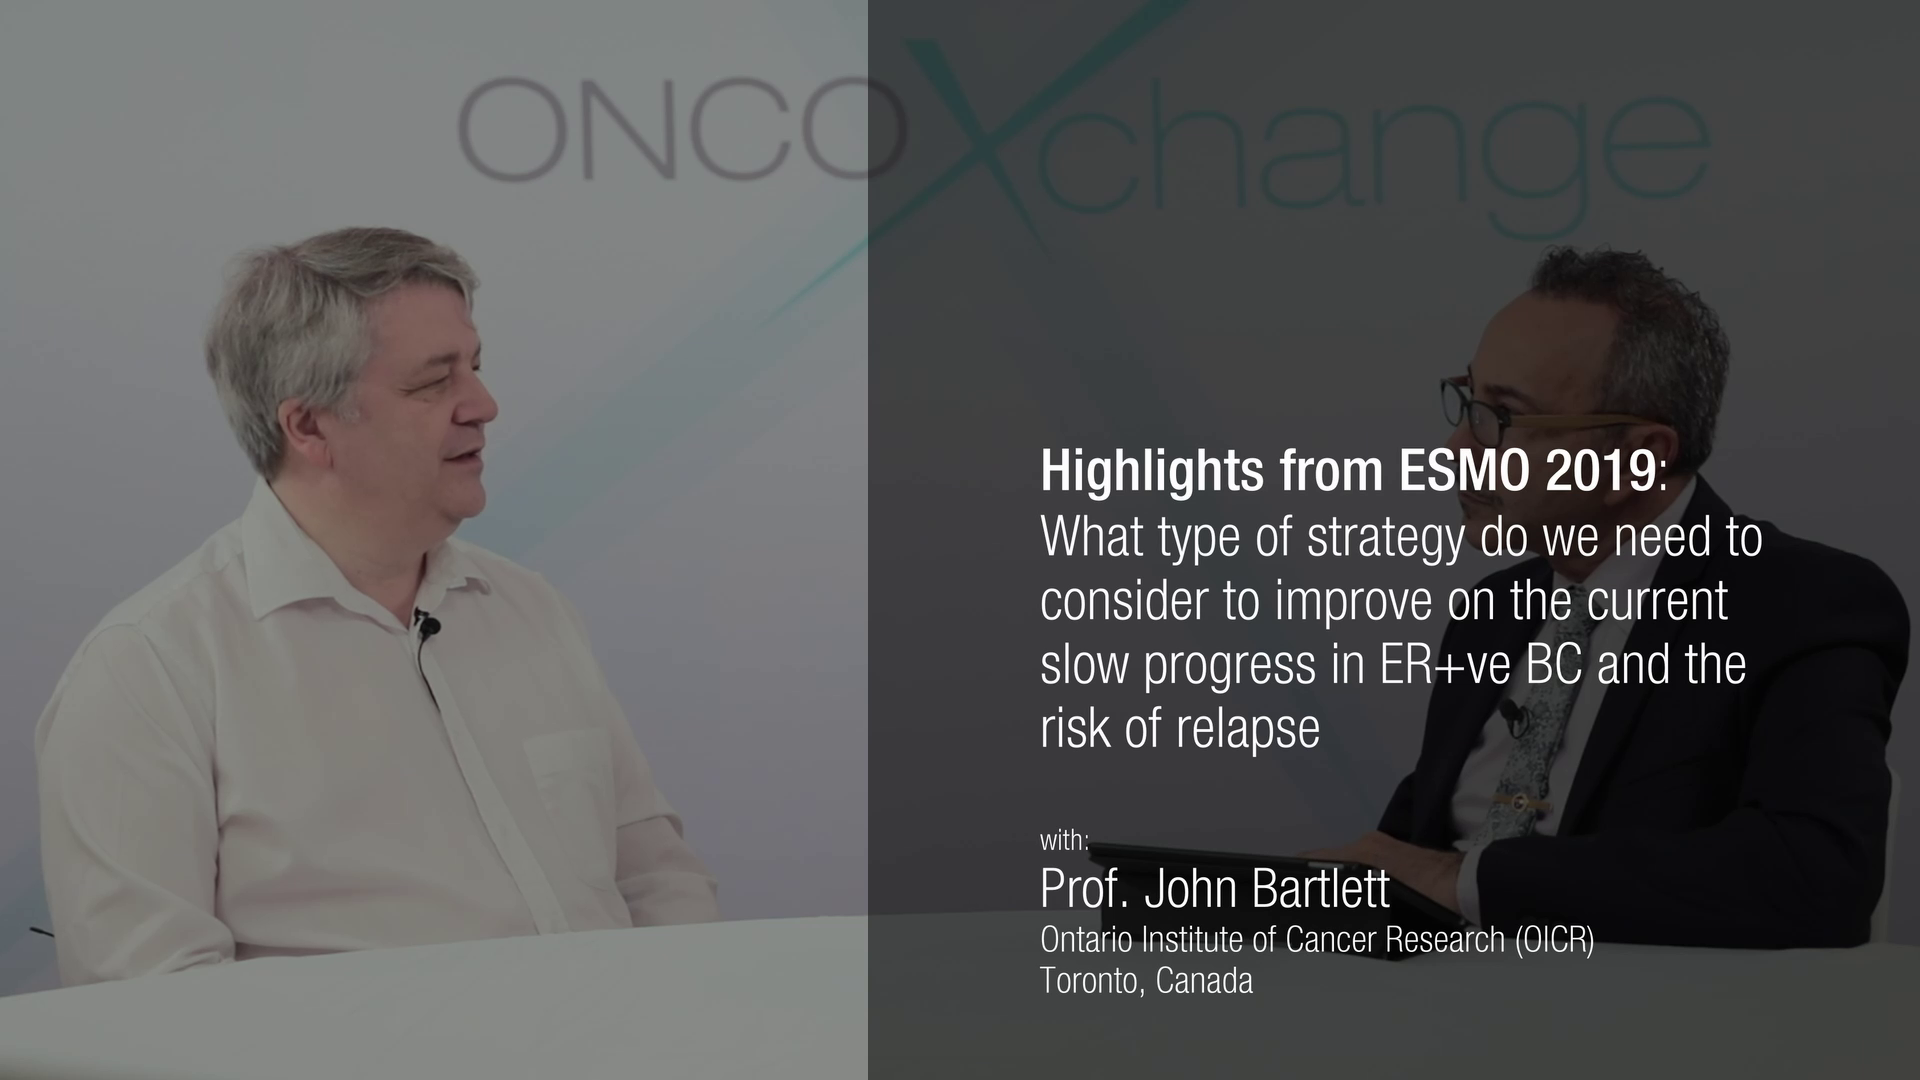 Strategies to consider to improve the slow progress in ER+ve BC and the risk of relapse